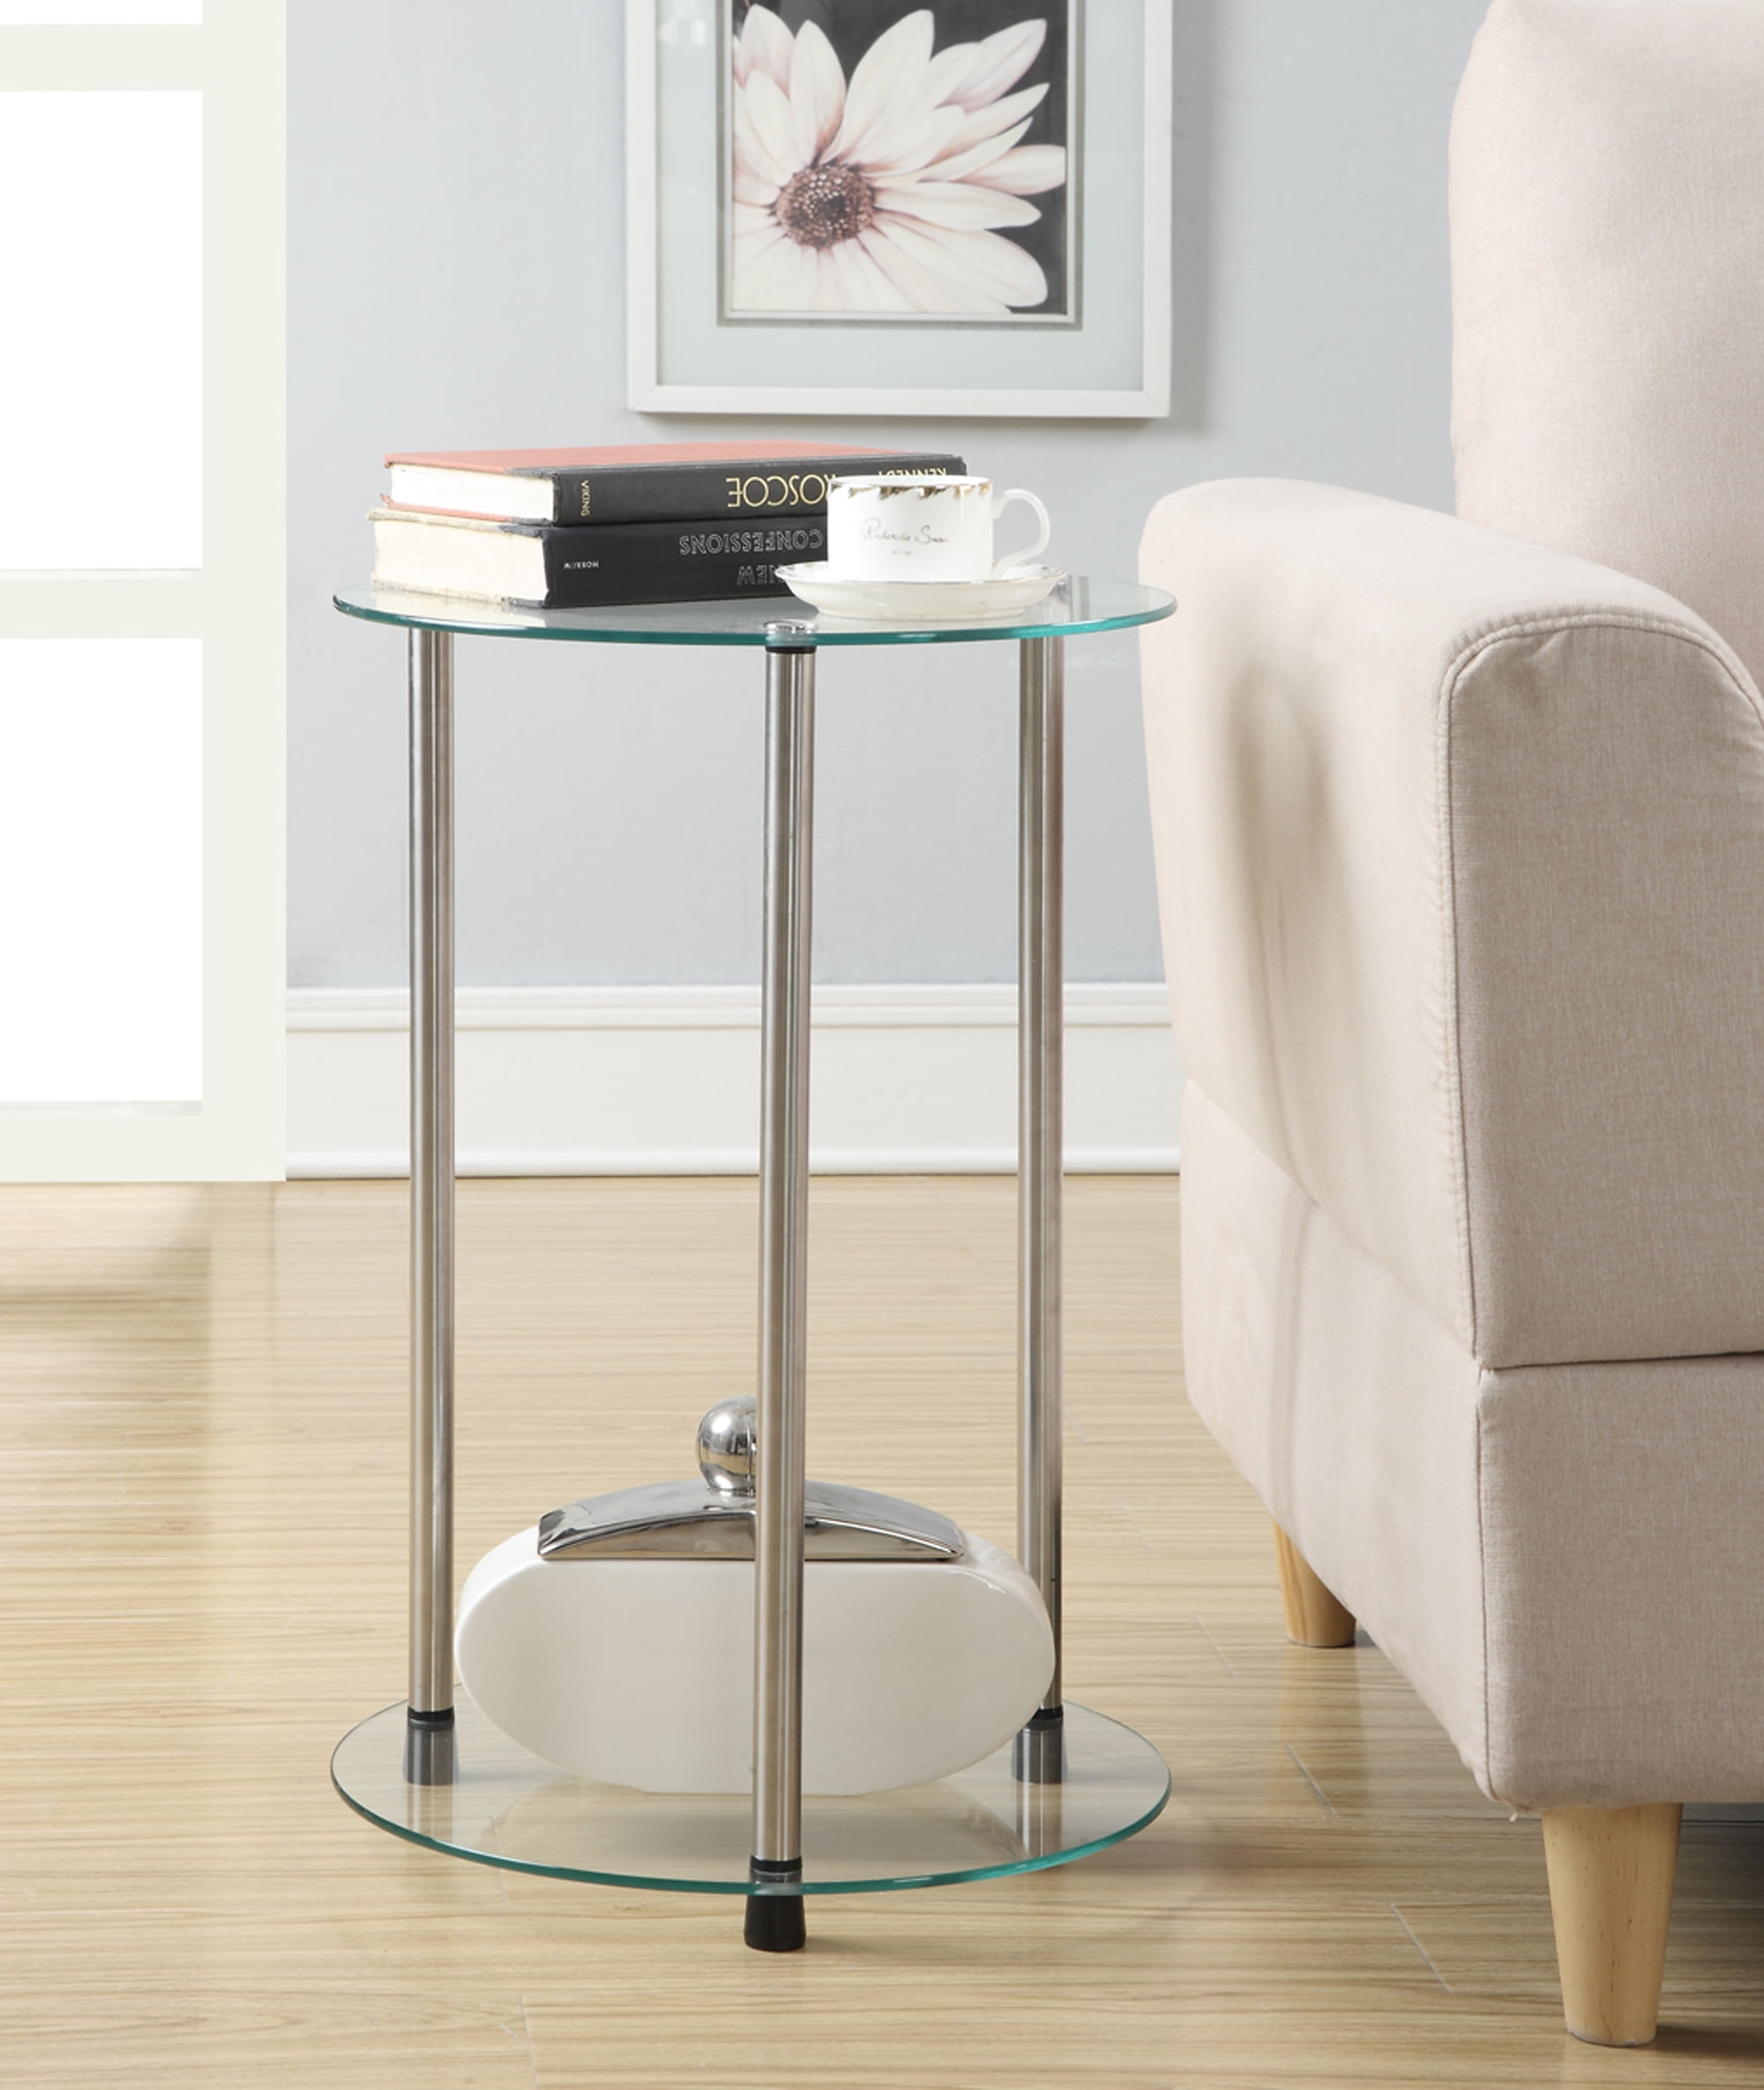 Details about   Simple Round Coffee Tea Table End Table Living Room for Magazines Books&Plants 